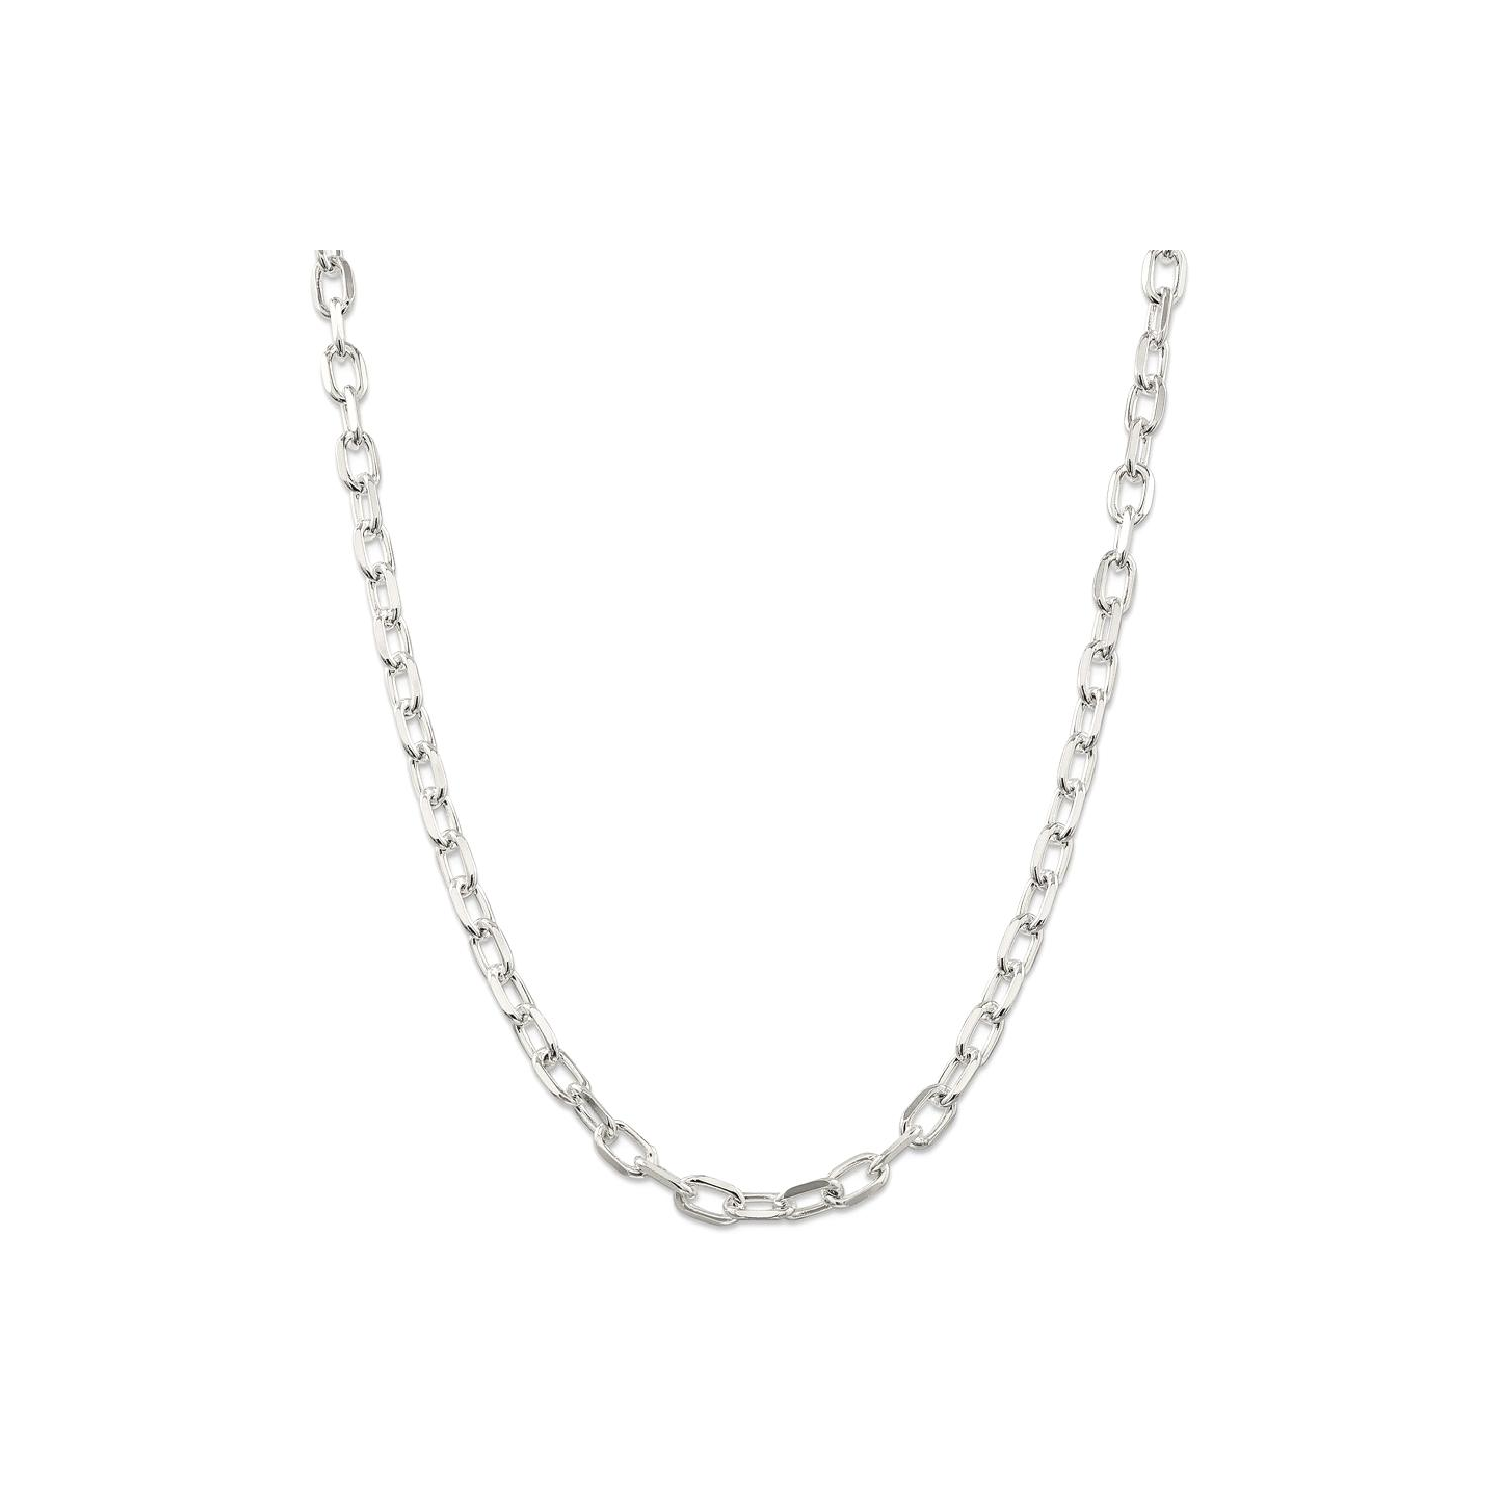 IceCarats 925 Sterling Silver 6.5mm Link Cable Chain Necklace 20 Inch Elongated Sided